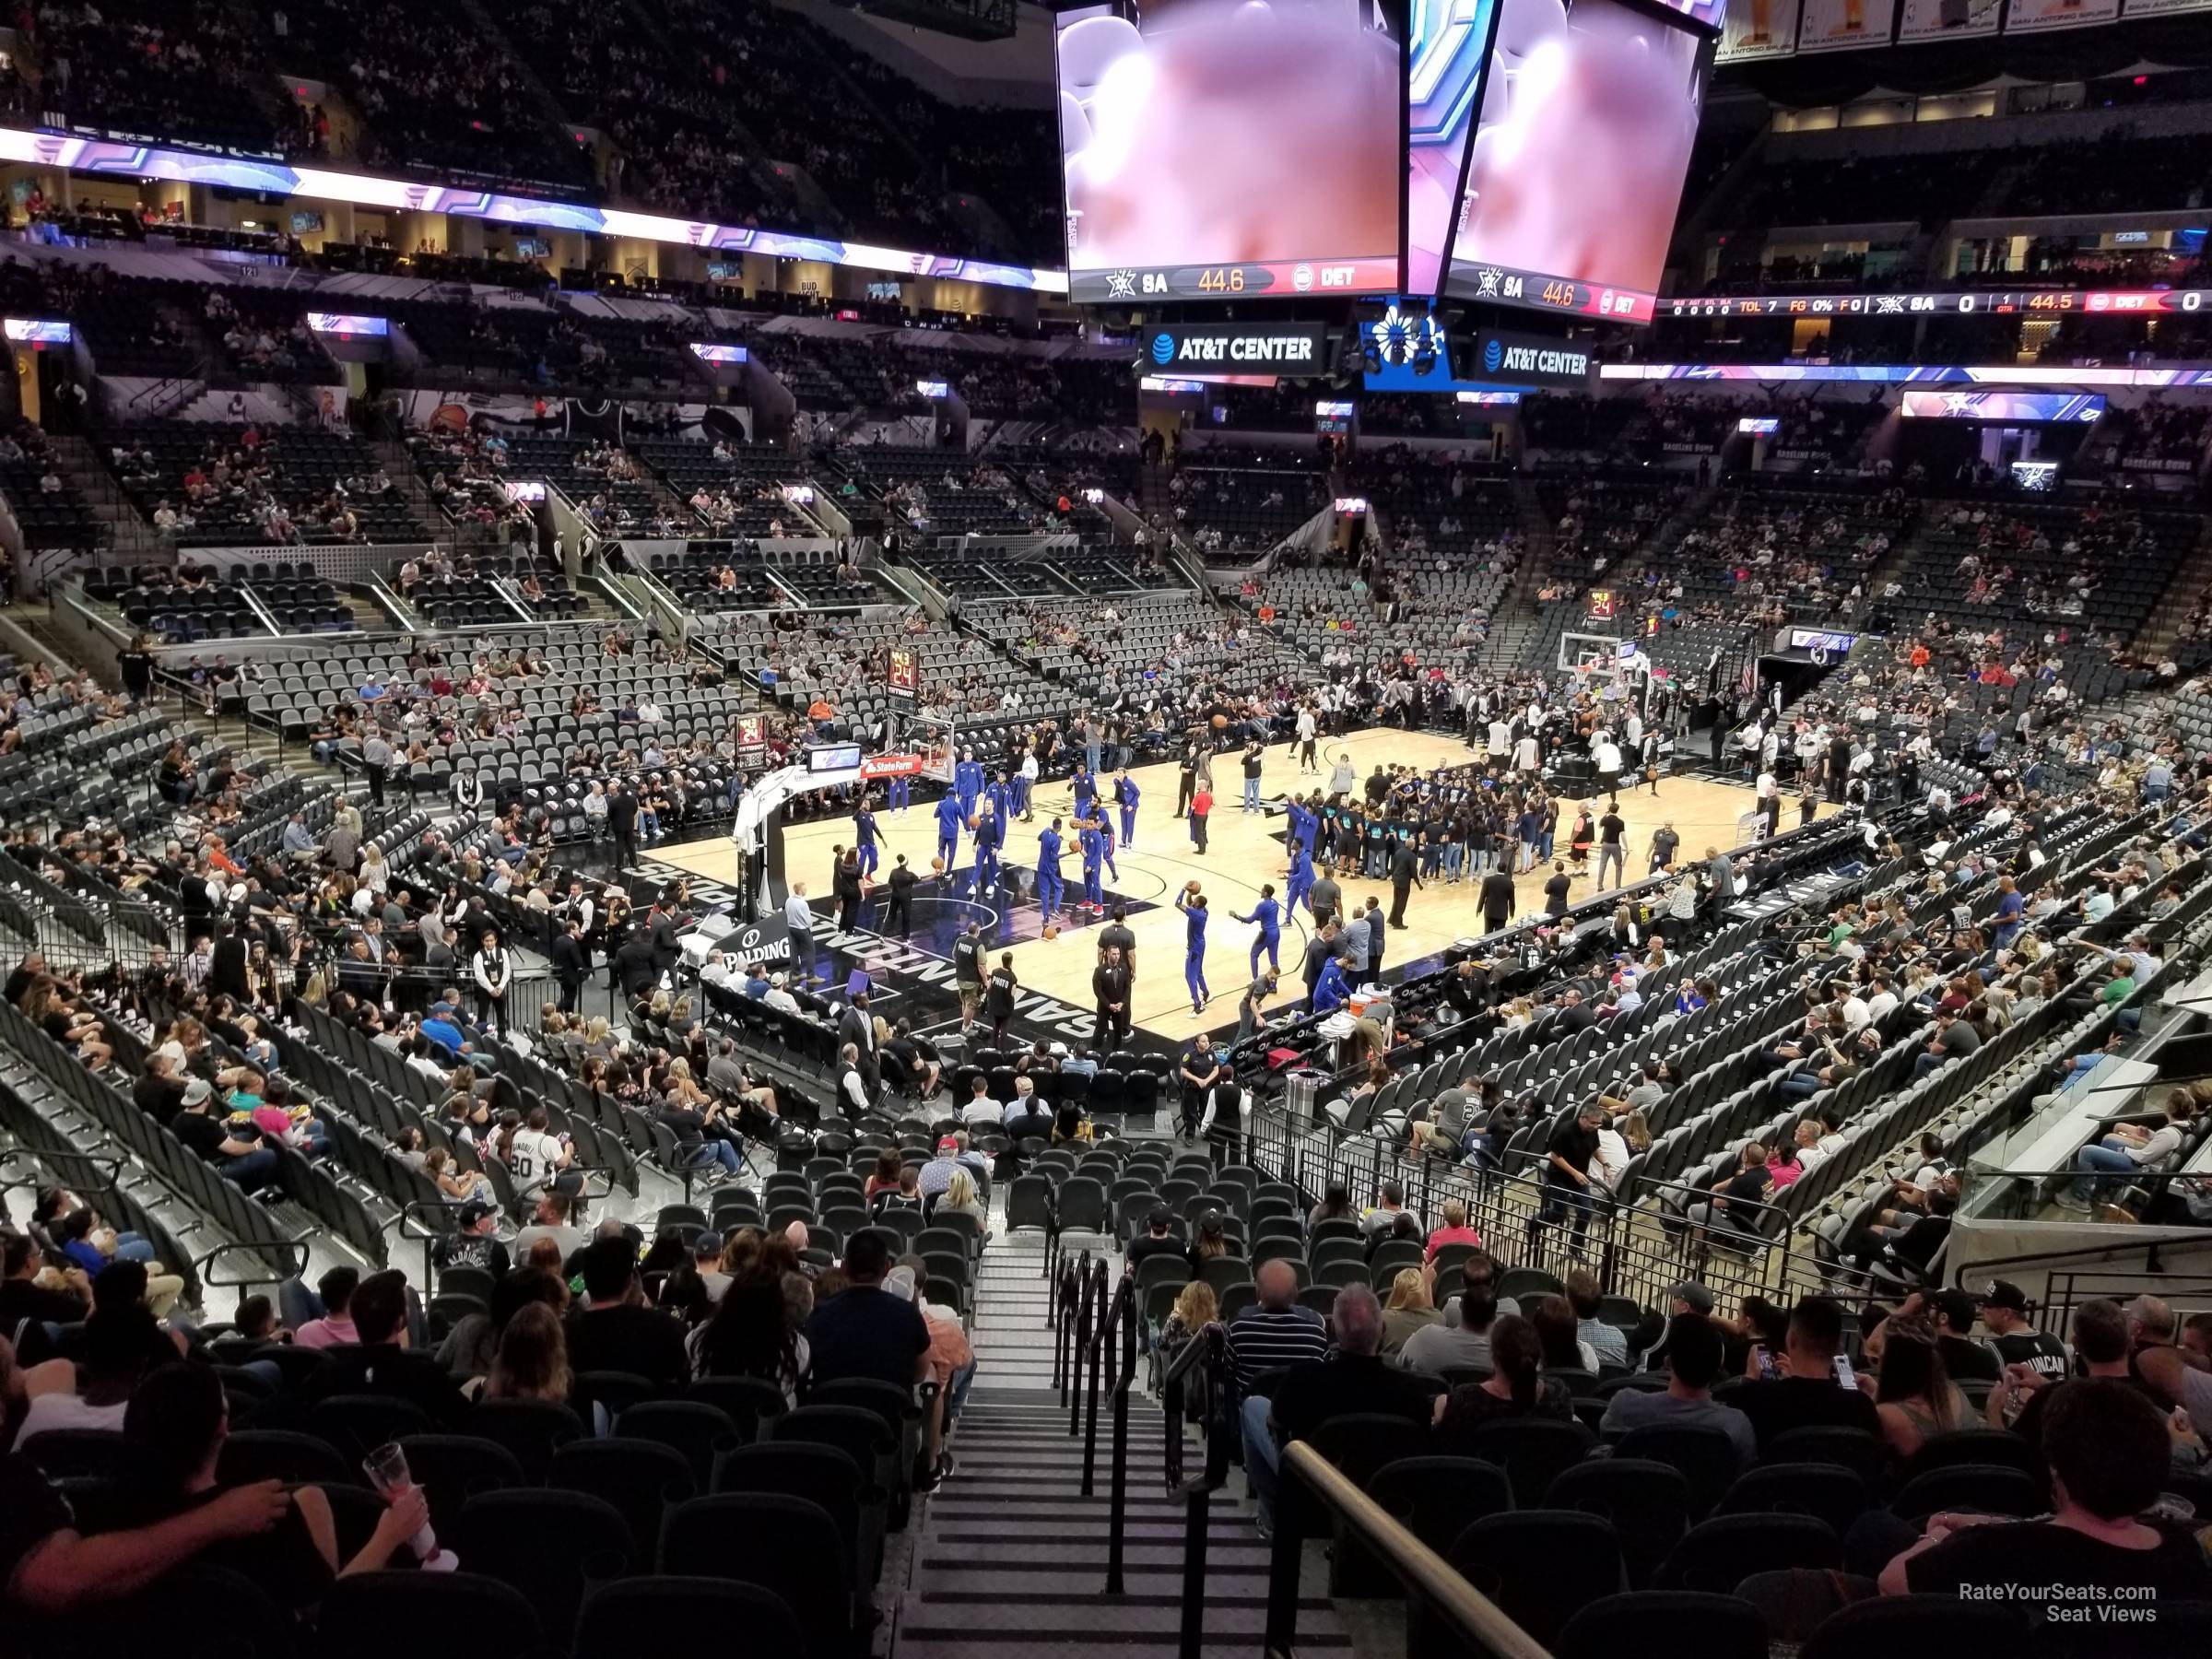 section 112, row 28 seat view  for basketball - at&t center